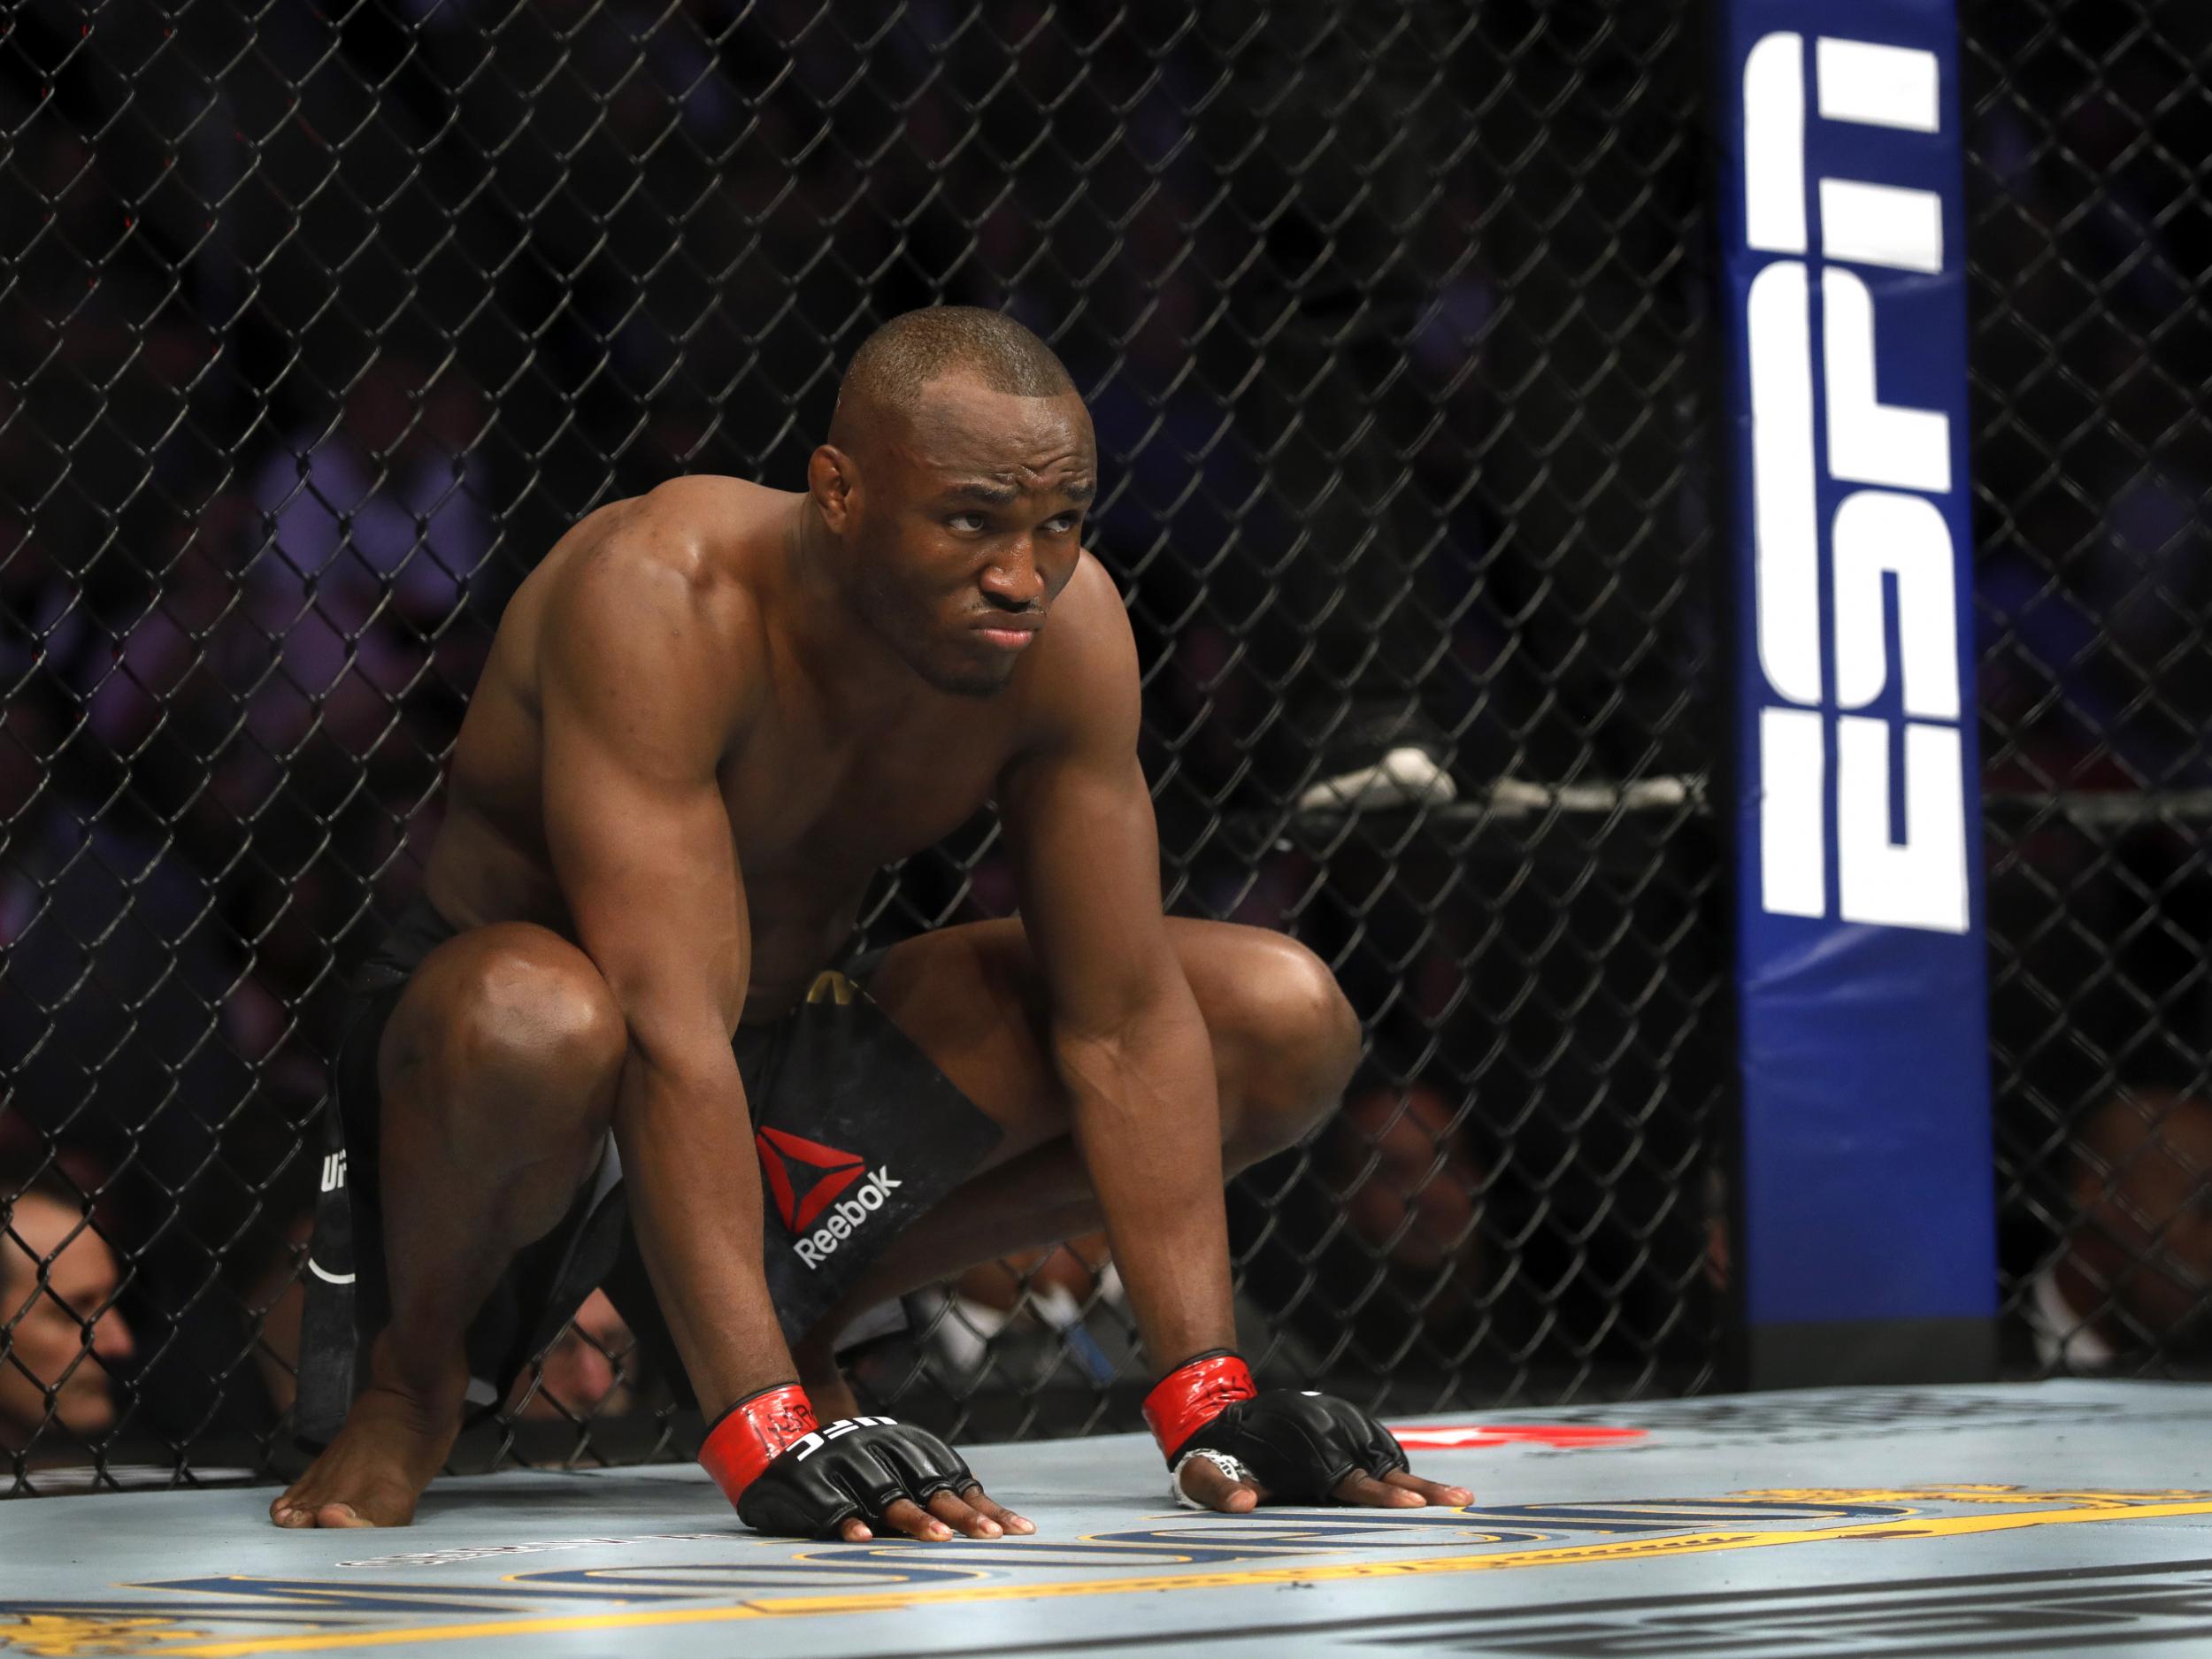 Welterweight champion Kamaru Usman makes the second defence of his title